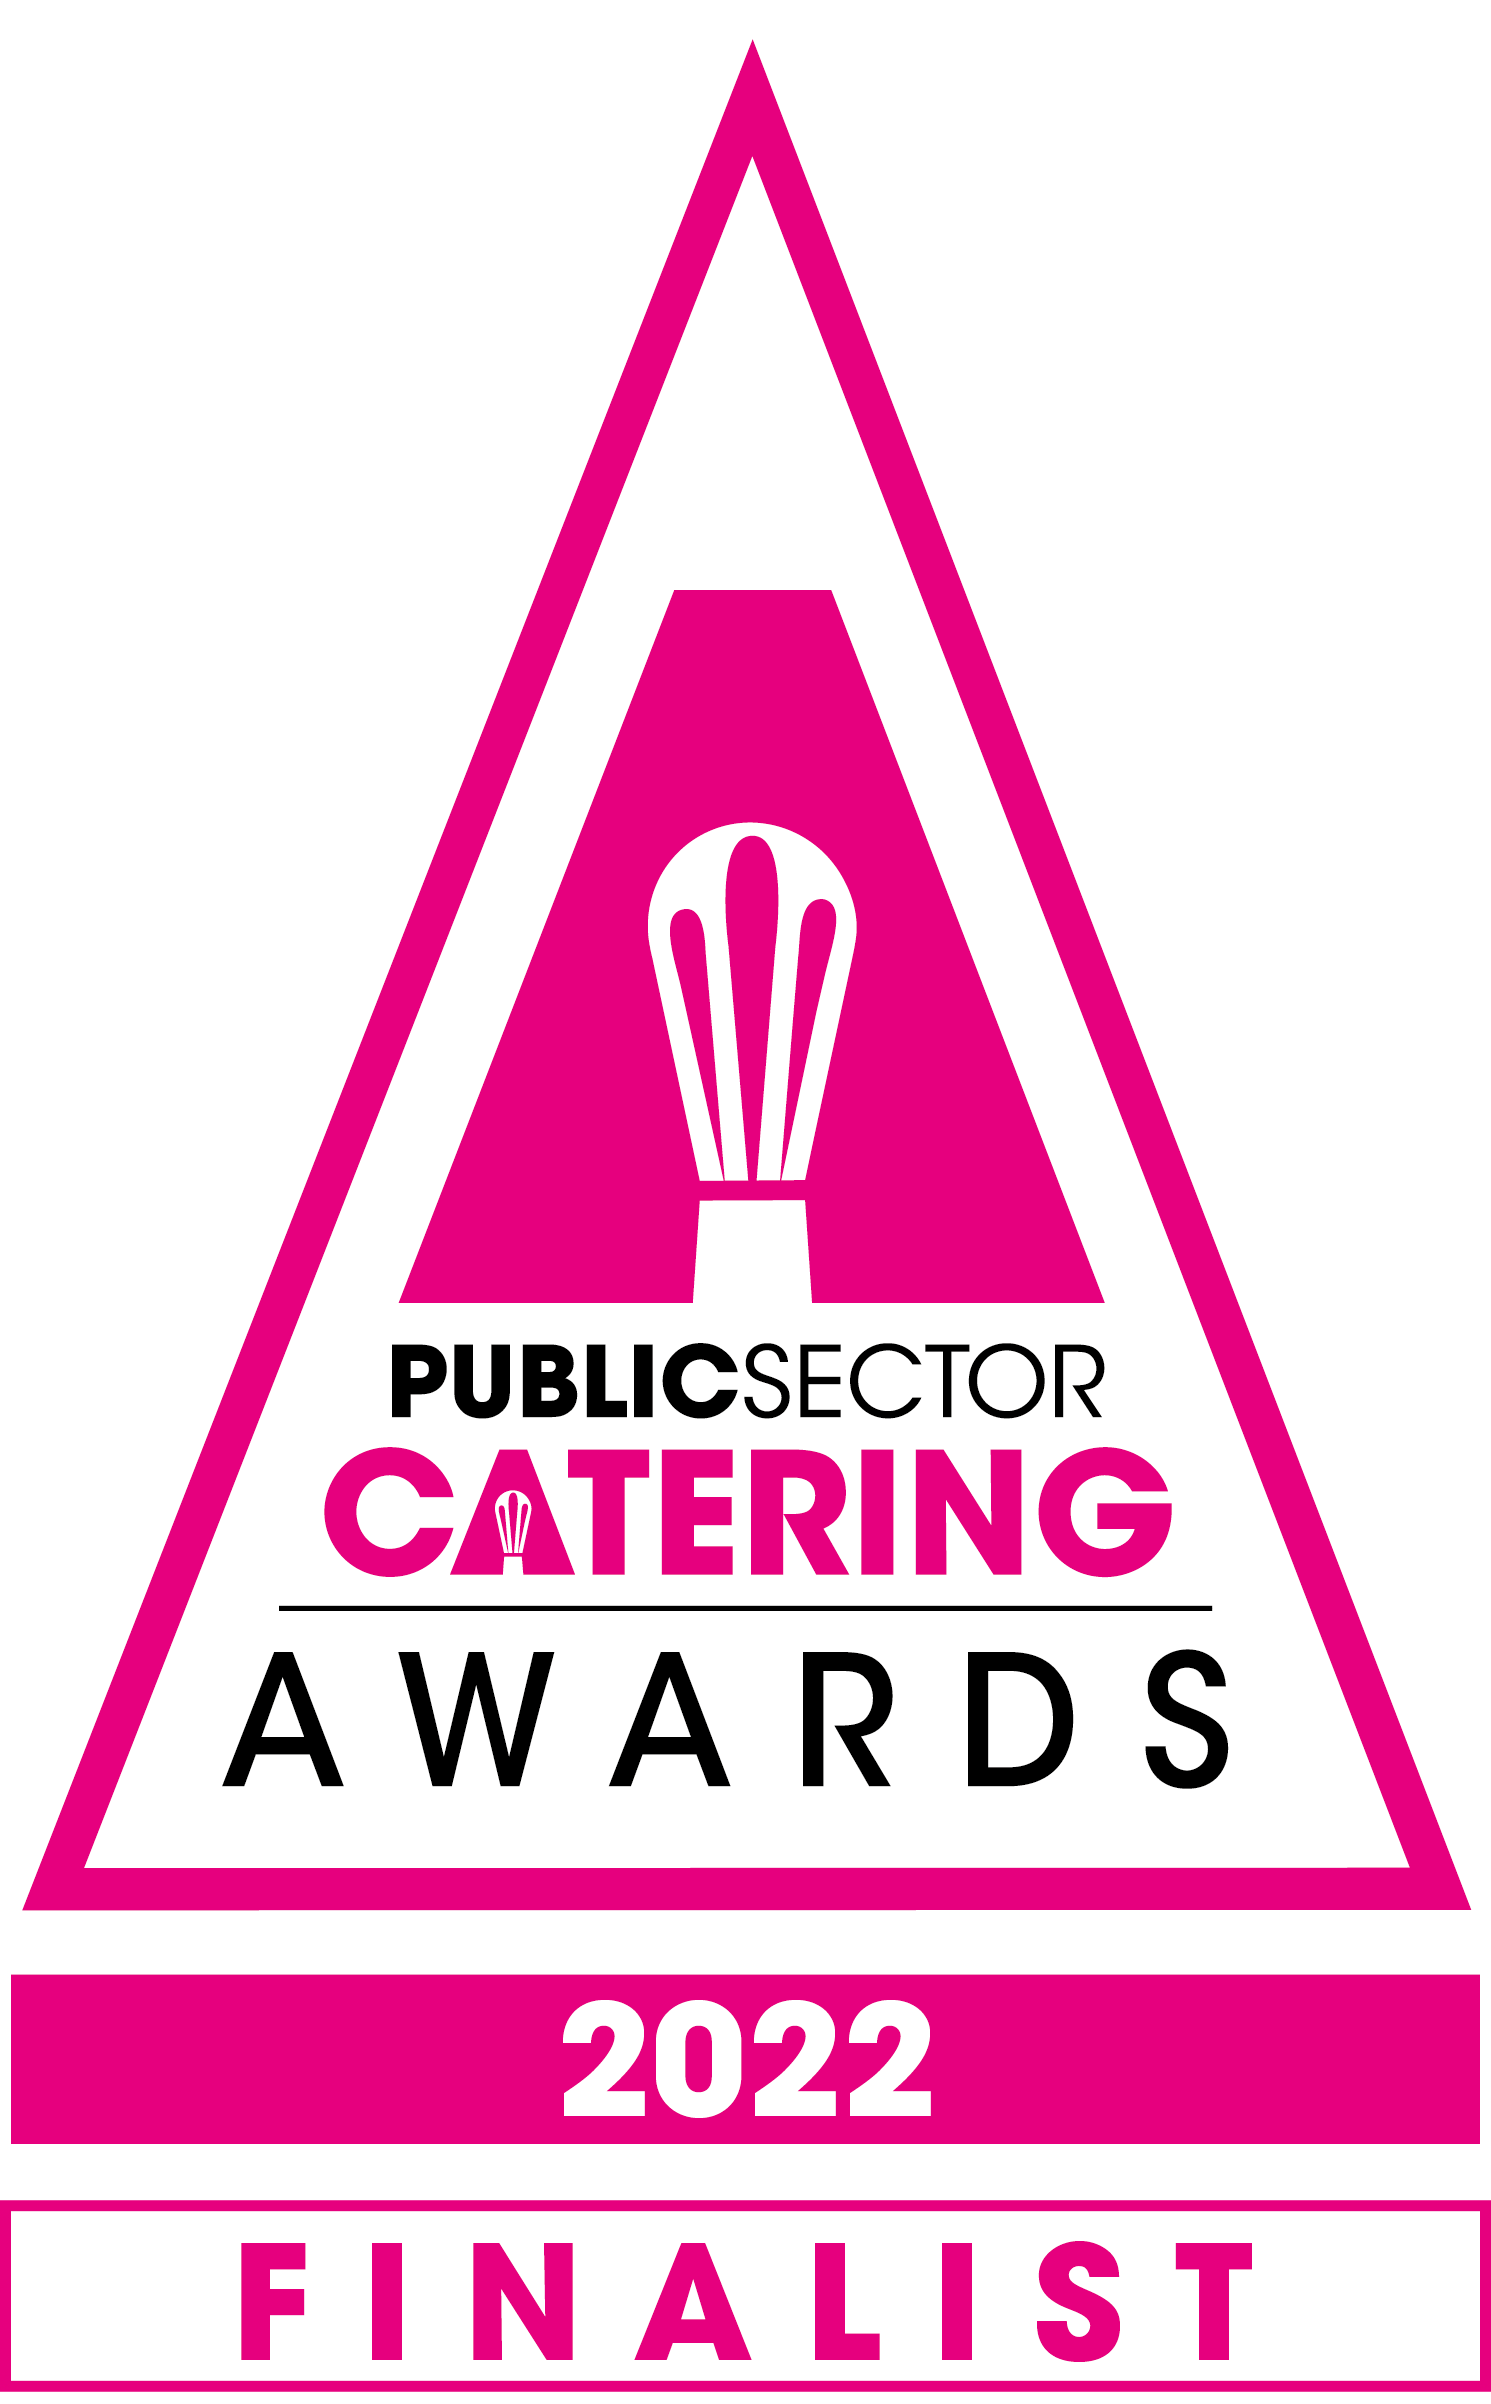 Public Sector Catering Awards Finalist 2022